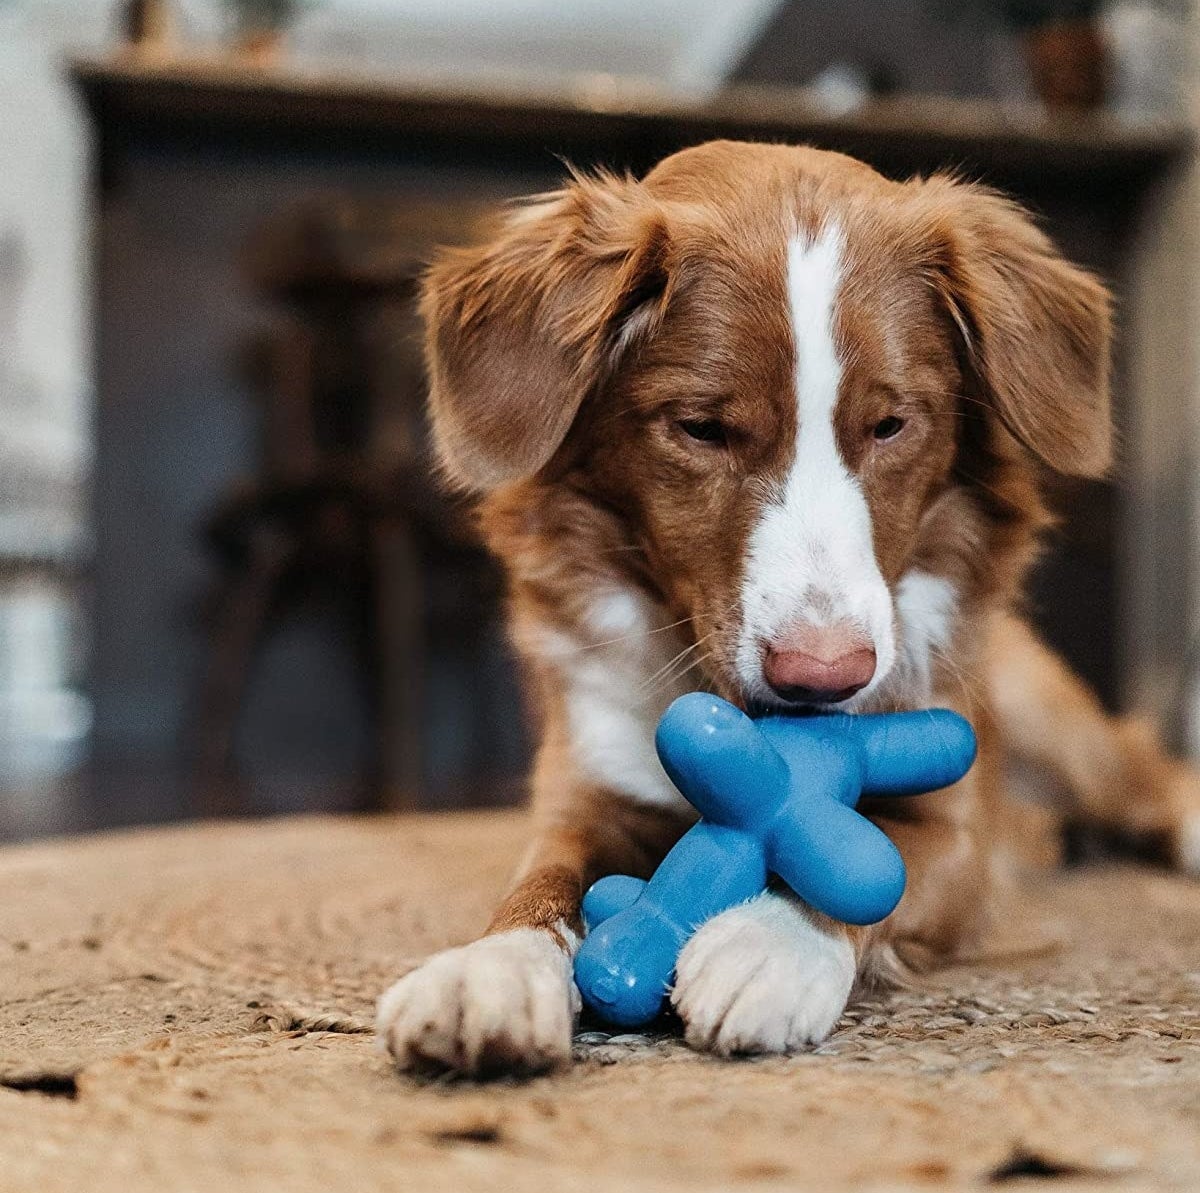 A dog playing with the toy